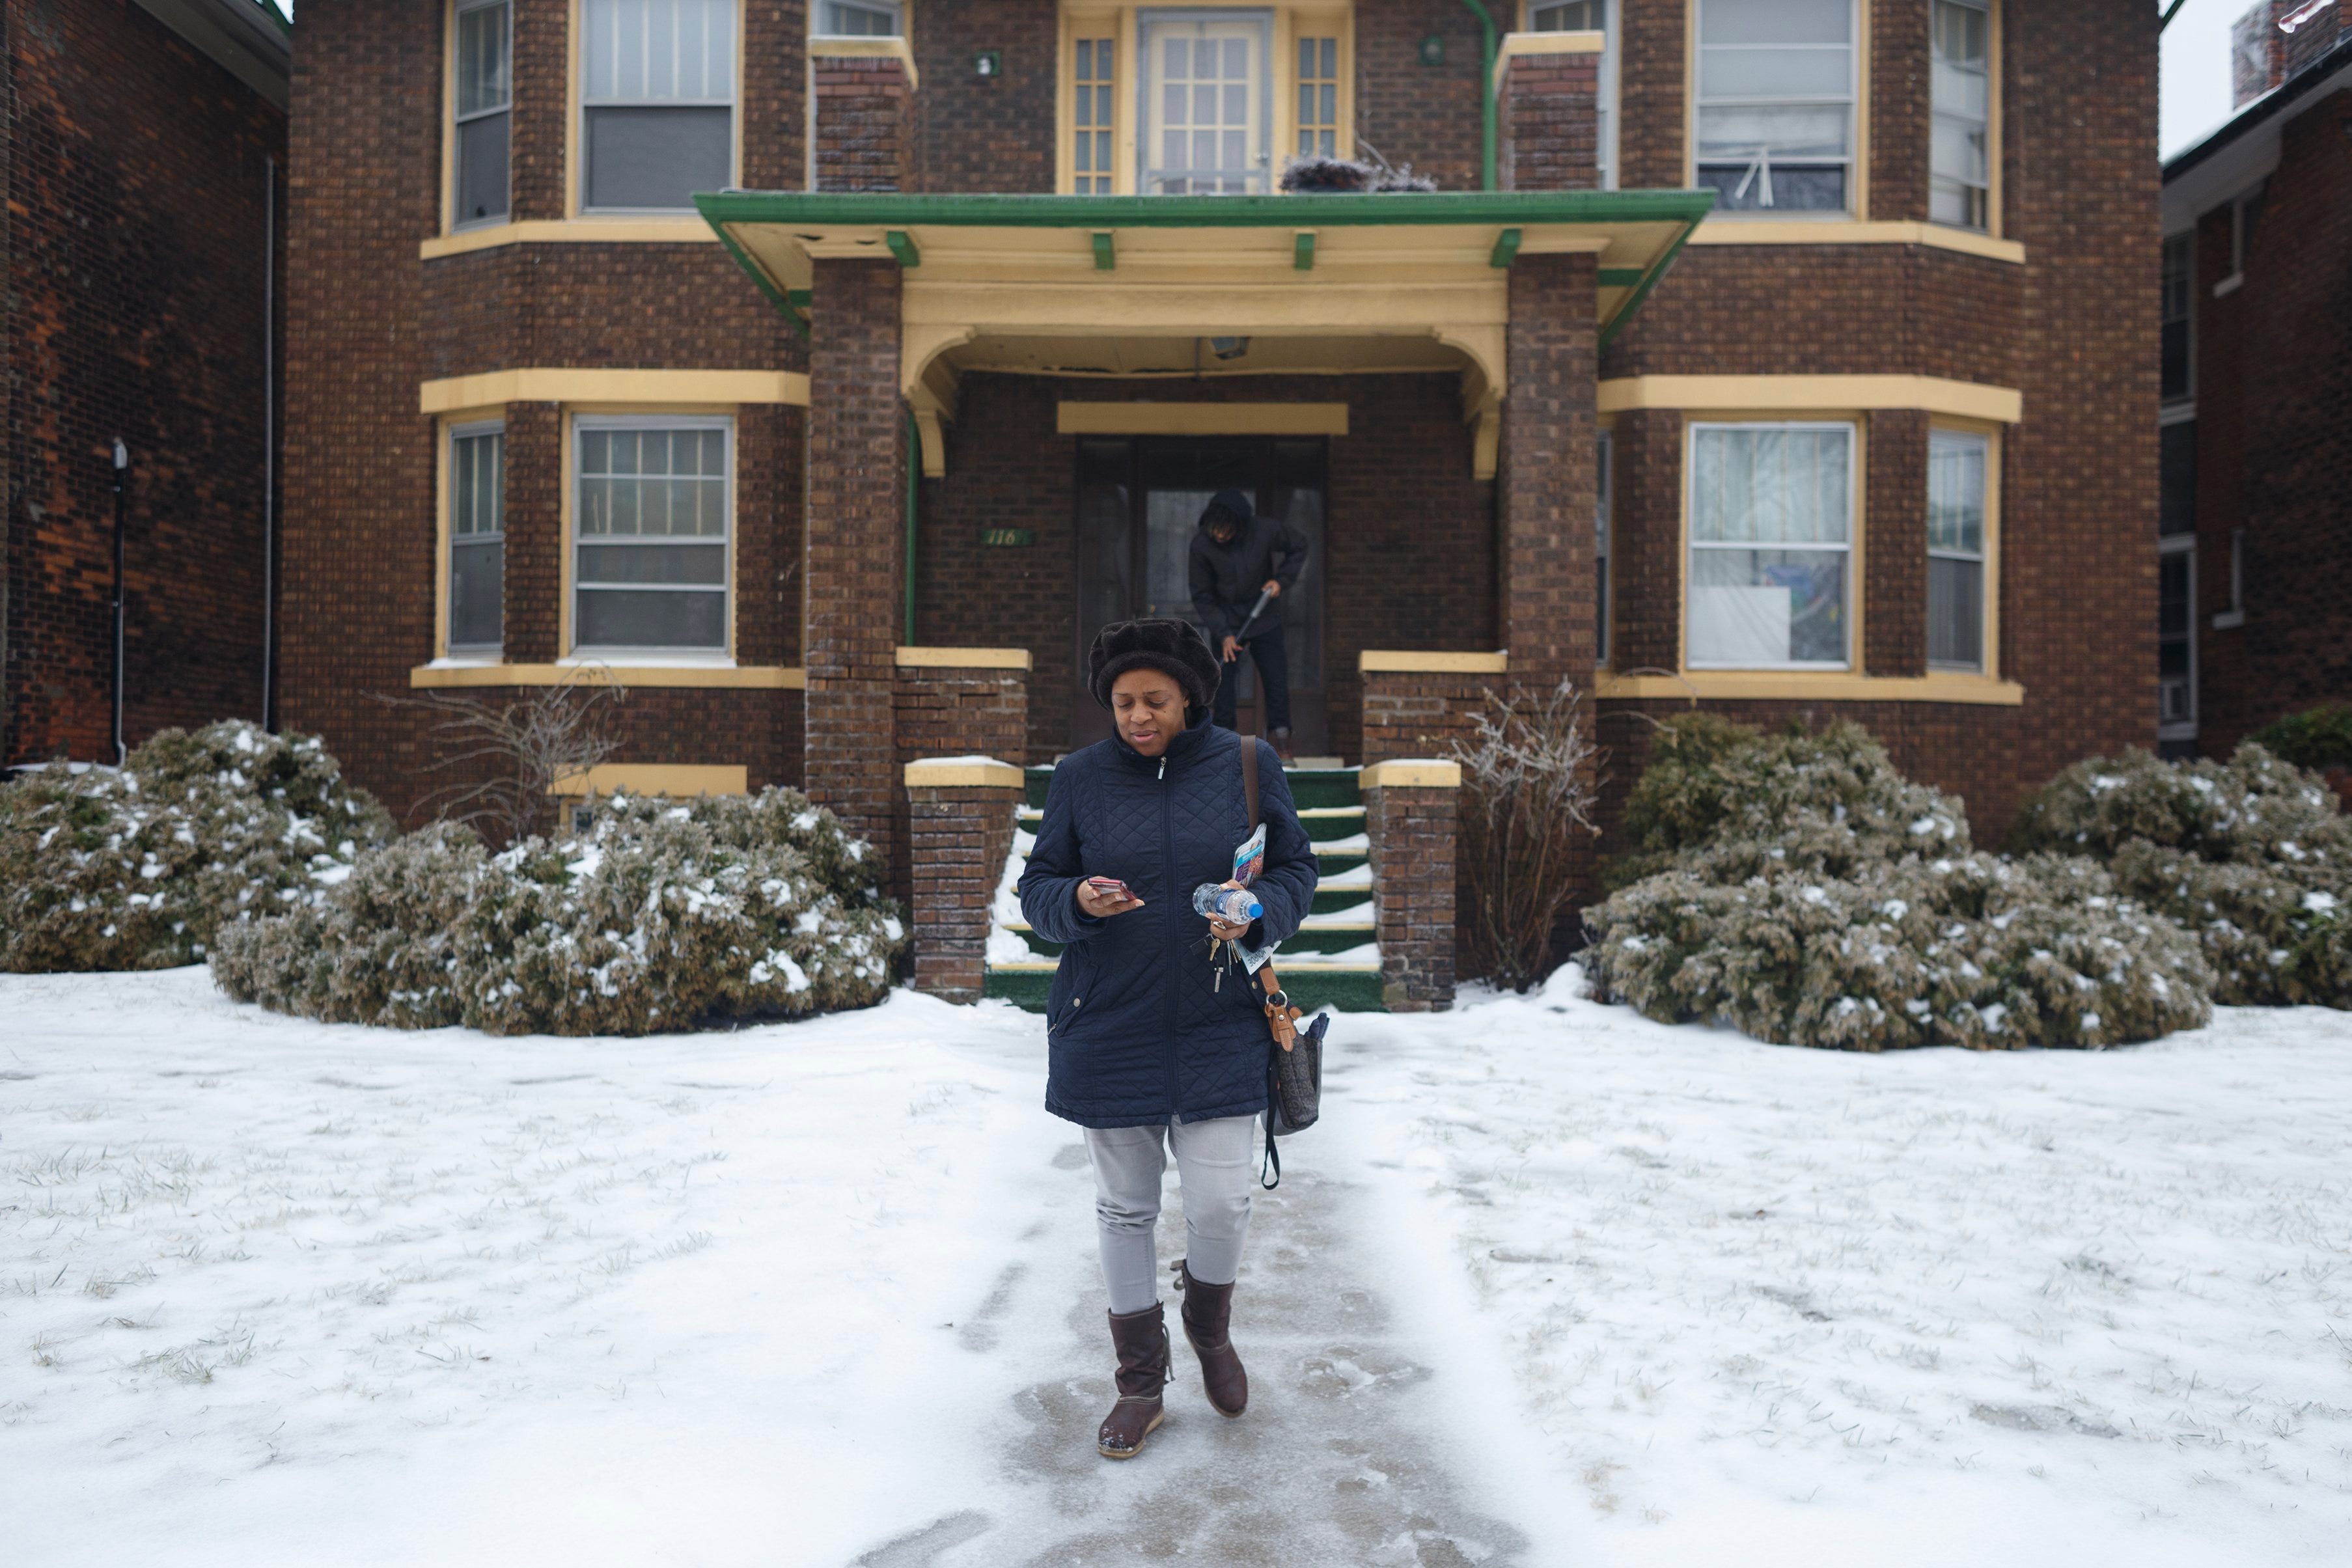 Charemon Brooks leaves her family home while her son Jalin Brooks shovels ice and snow from the front porch on Tuesday, Feb. 12, 2019 in Detroit. Charemon's home went into foreclosure and before she could buy it back, the house was sold to a developer. Brooks' two sons now live in the house and are unsure of their future.